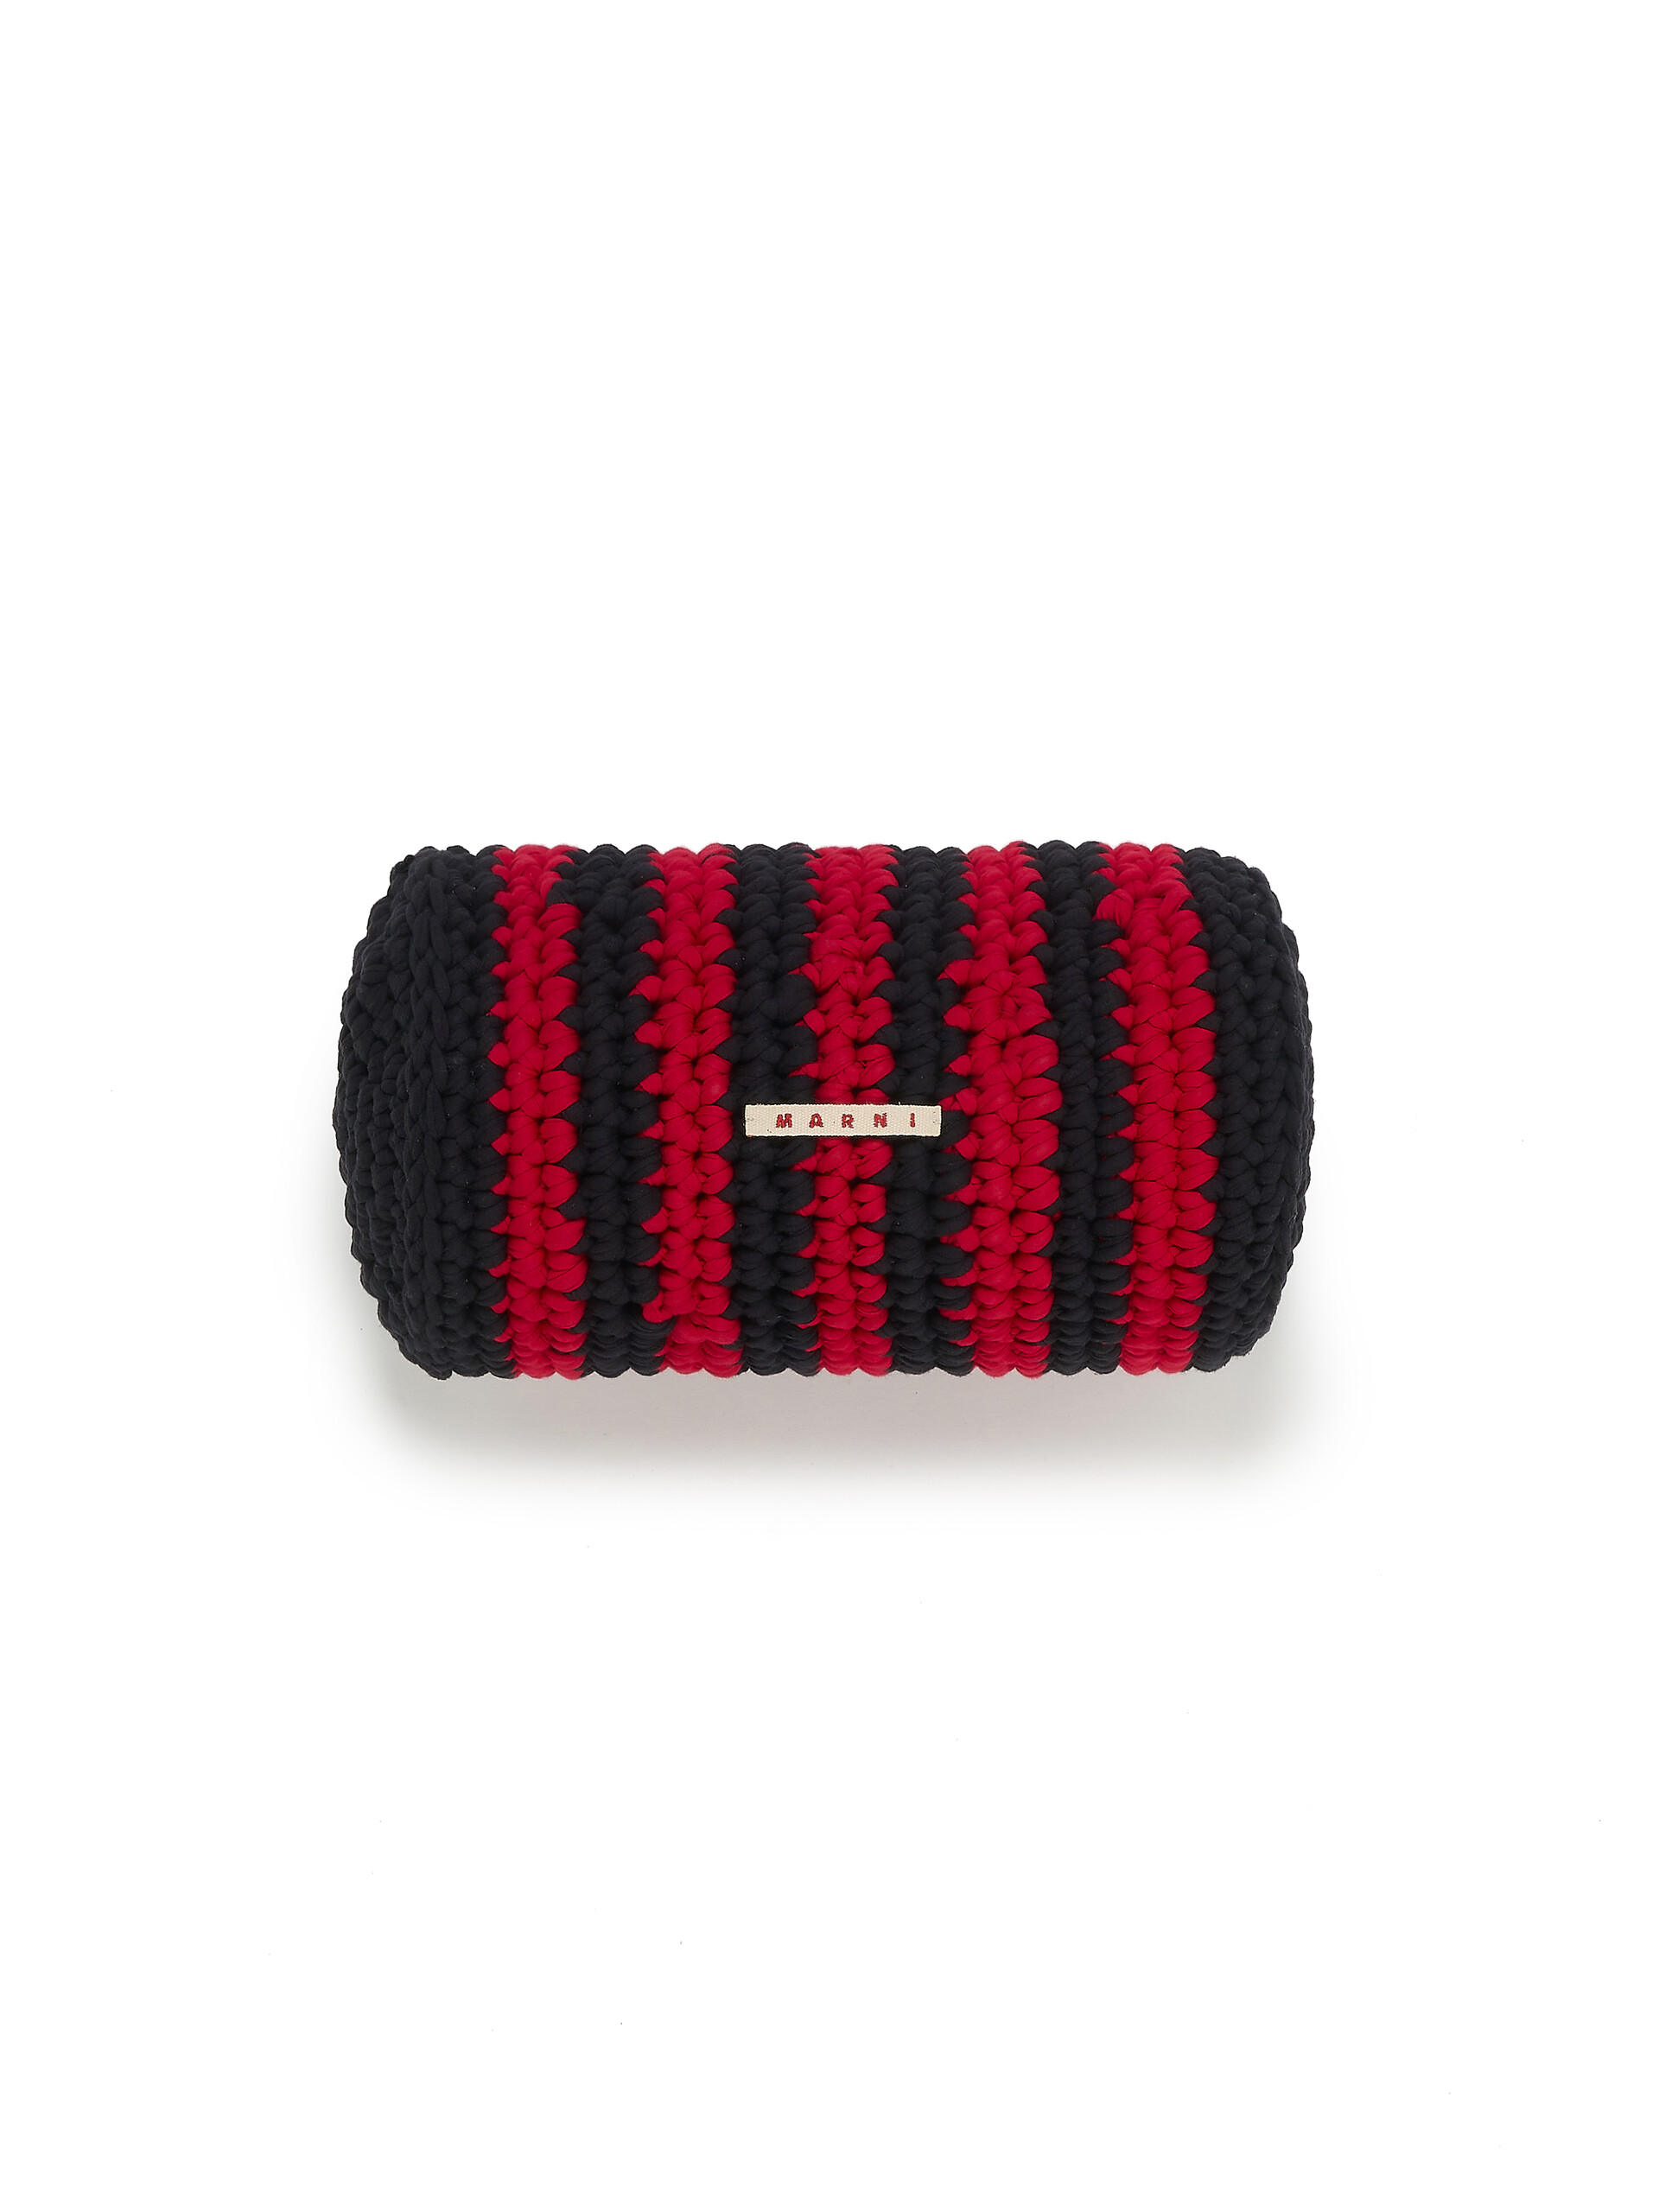 Red and black striped MARNI MARKET tech wool bolster cushion - Furniture - Image 2